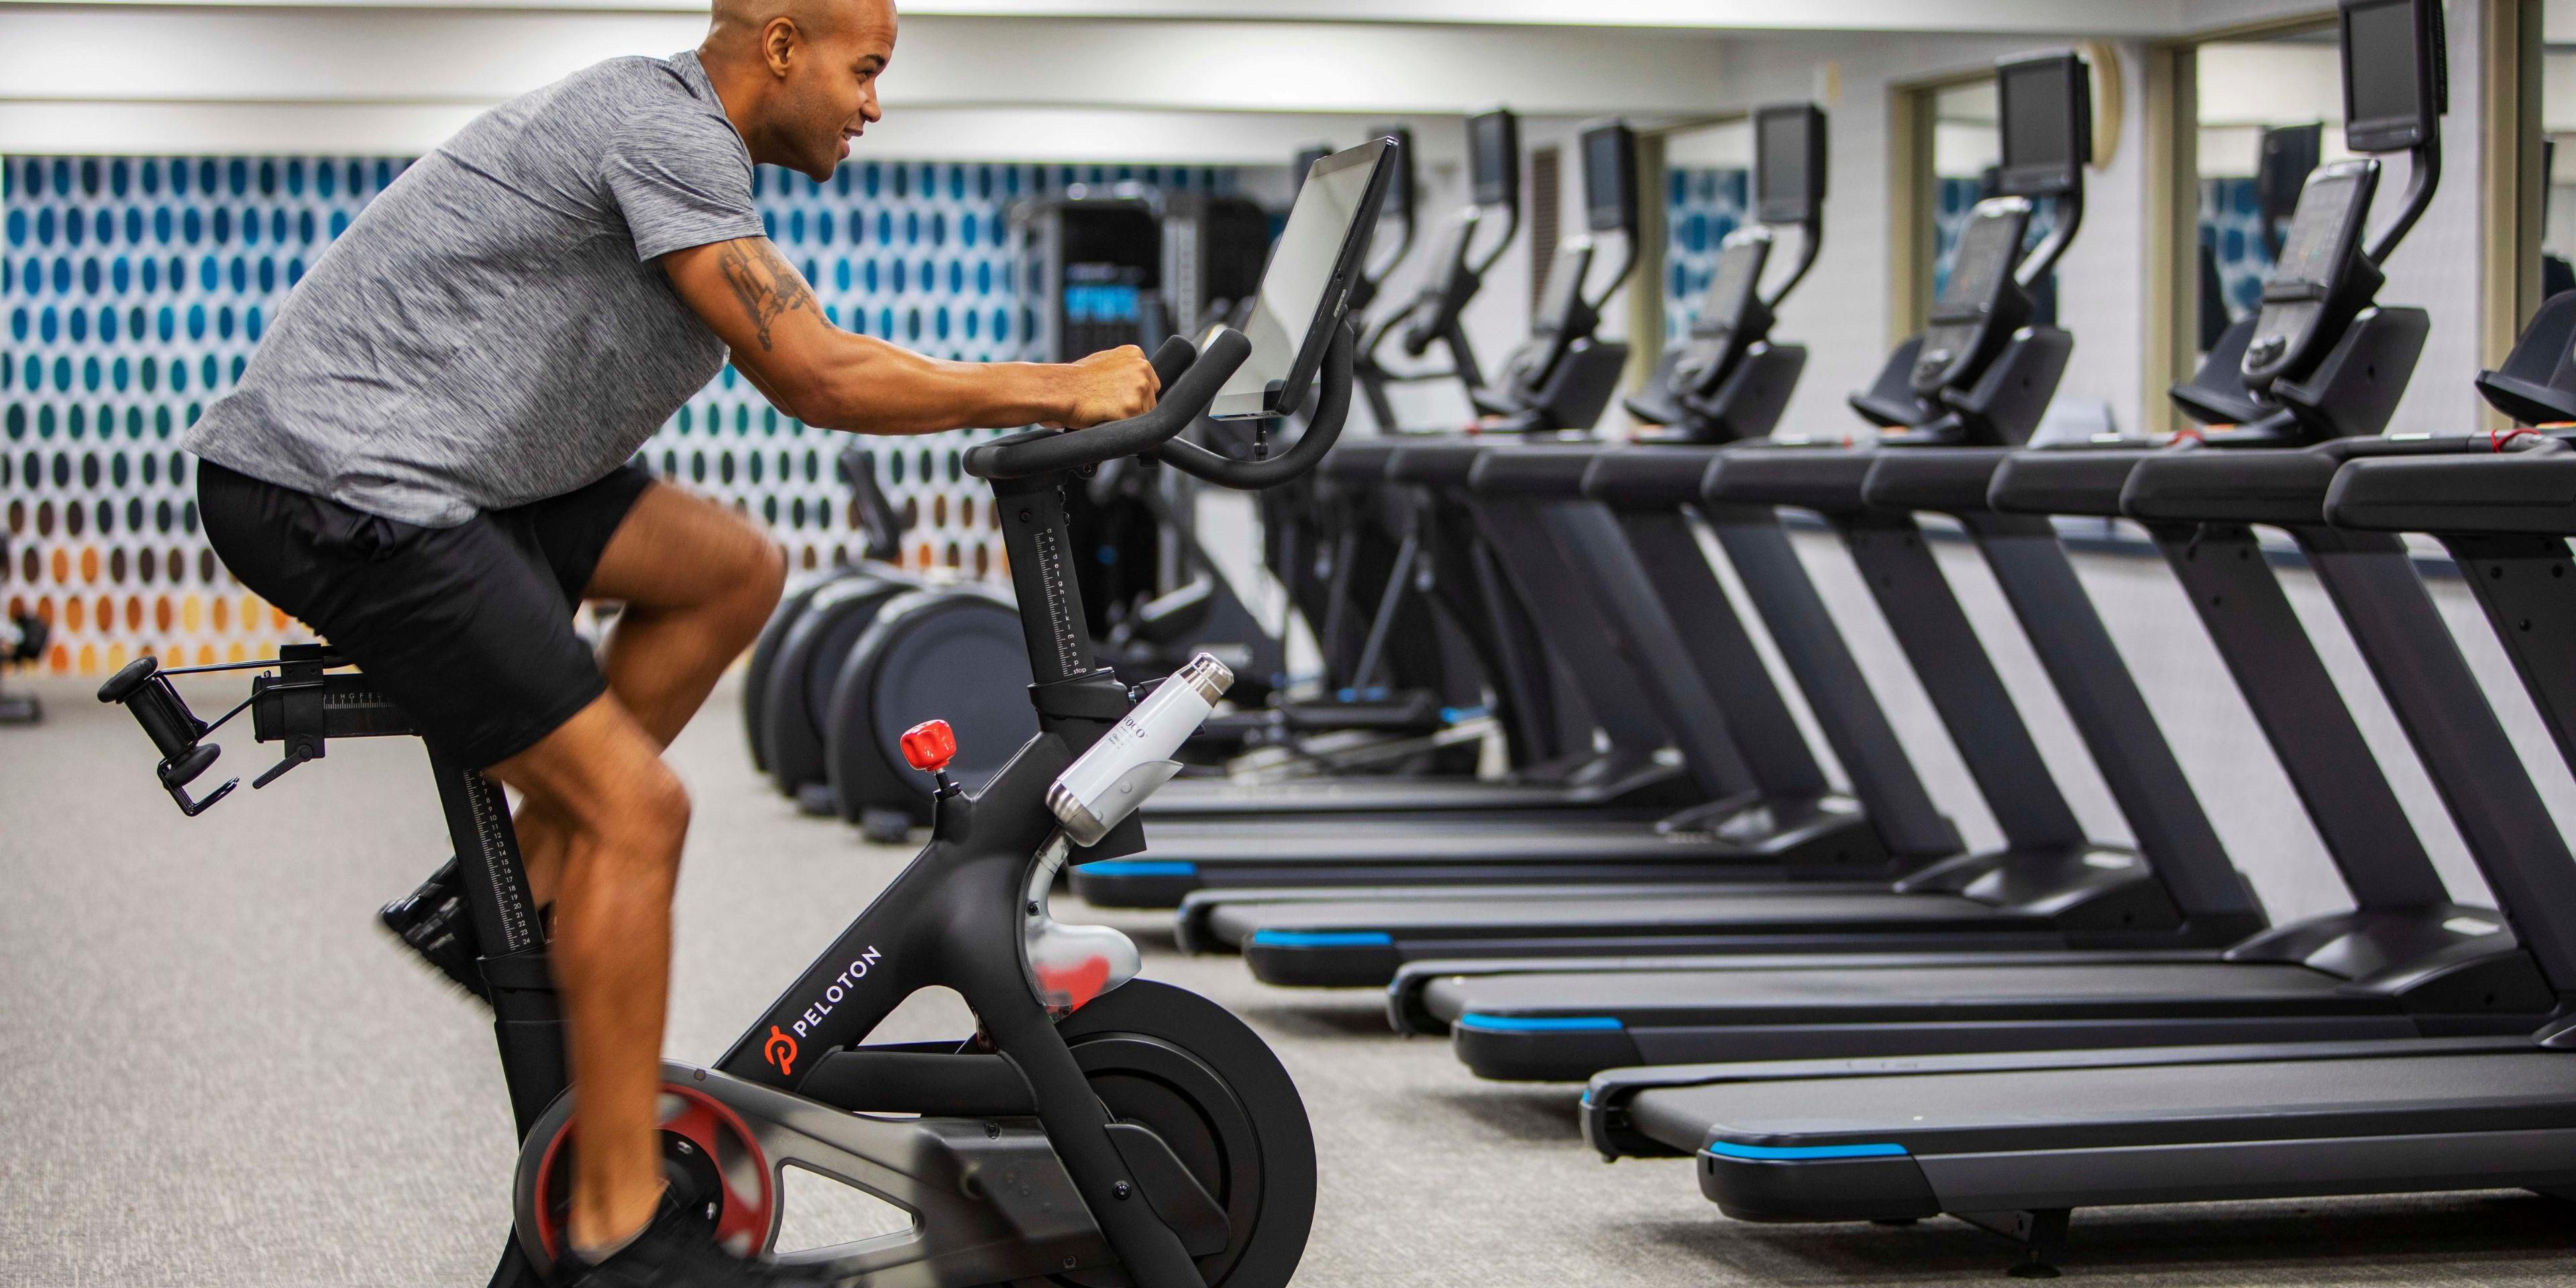 Peloton? Check. Treadmills? Check. Free weights? Check. Stay in shape on business and vacation trips our 24-hour fitness center and step into the sauna for some post-workout heat therapy. You'll feel ready and energized to explore our Chicago neighborhood.